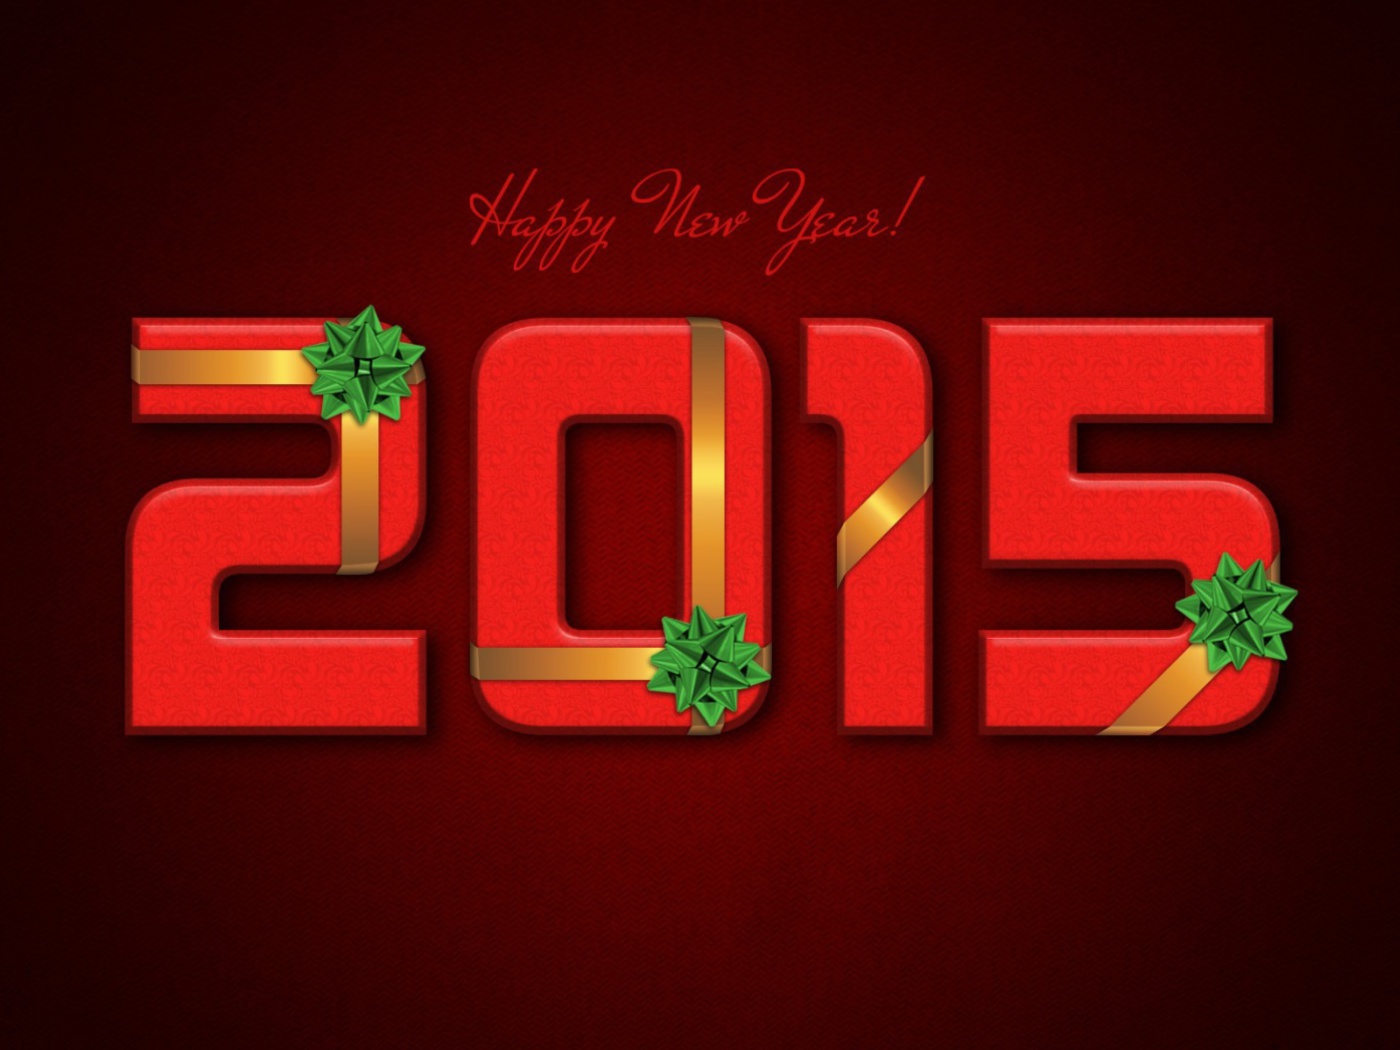 New Year 2015 Red Texture wallpaper 1400x1050